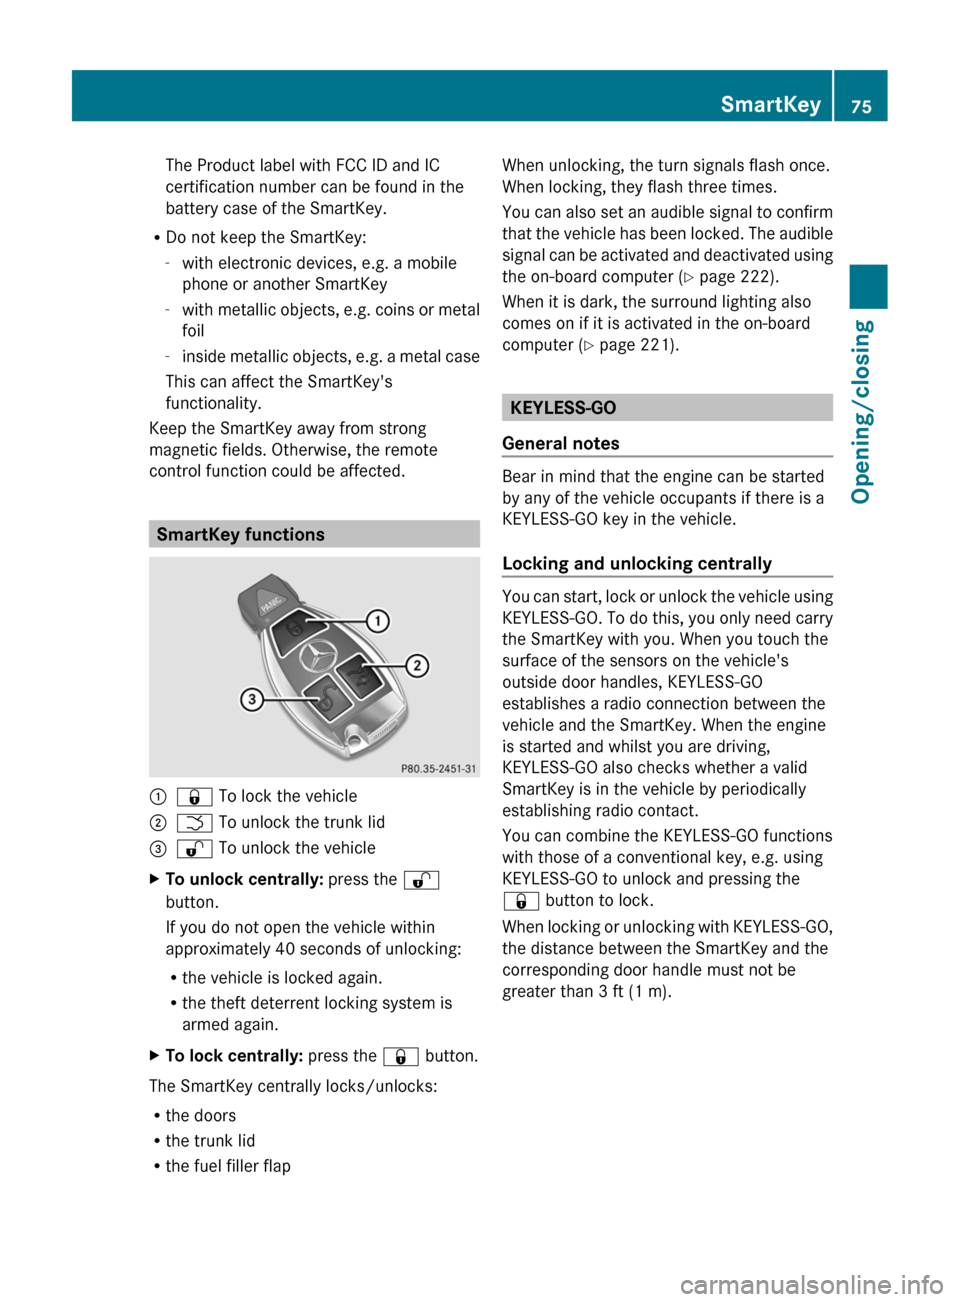 MERCEDES-BENZ CLS-Class 2013 W218 Owners Manual The Product label with FCC ID and IC
certification number can be found in the
battery case of the SmartKey.
R Do not keep the SmartKey:
-with electronic devices, e.g. a mobile
phone or another SmartKe